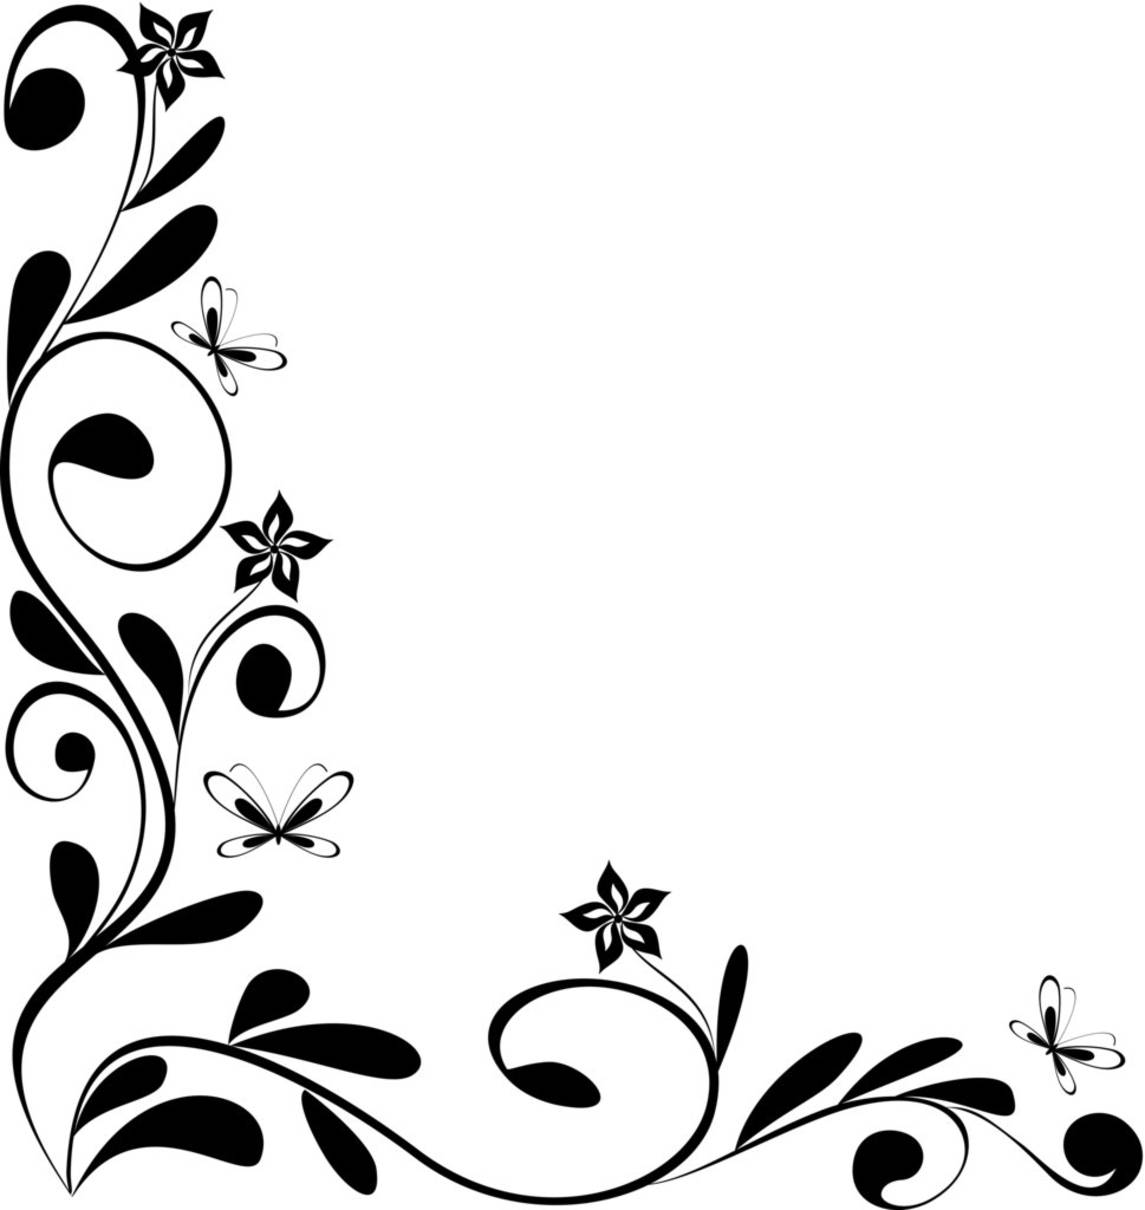 Cool Borders To Draw | Free Download Clip Art | Free Clip Art | on ...